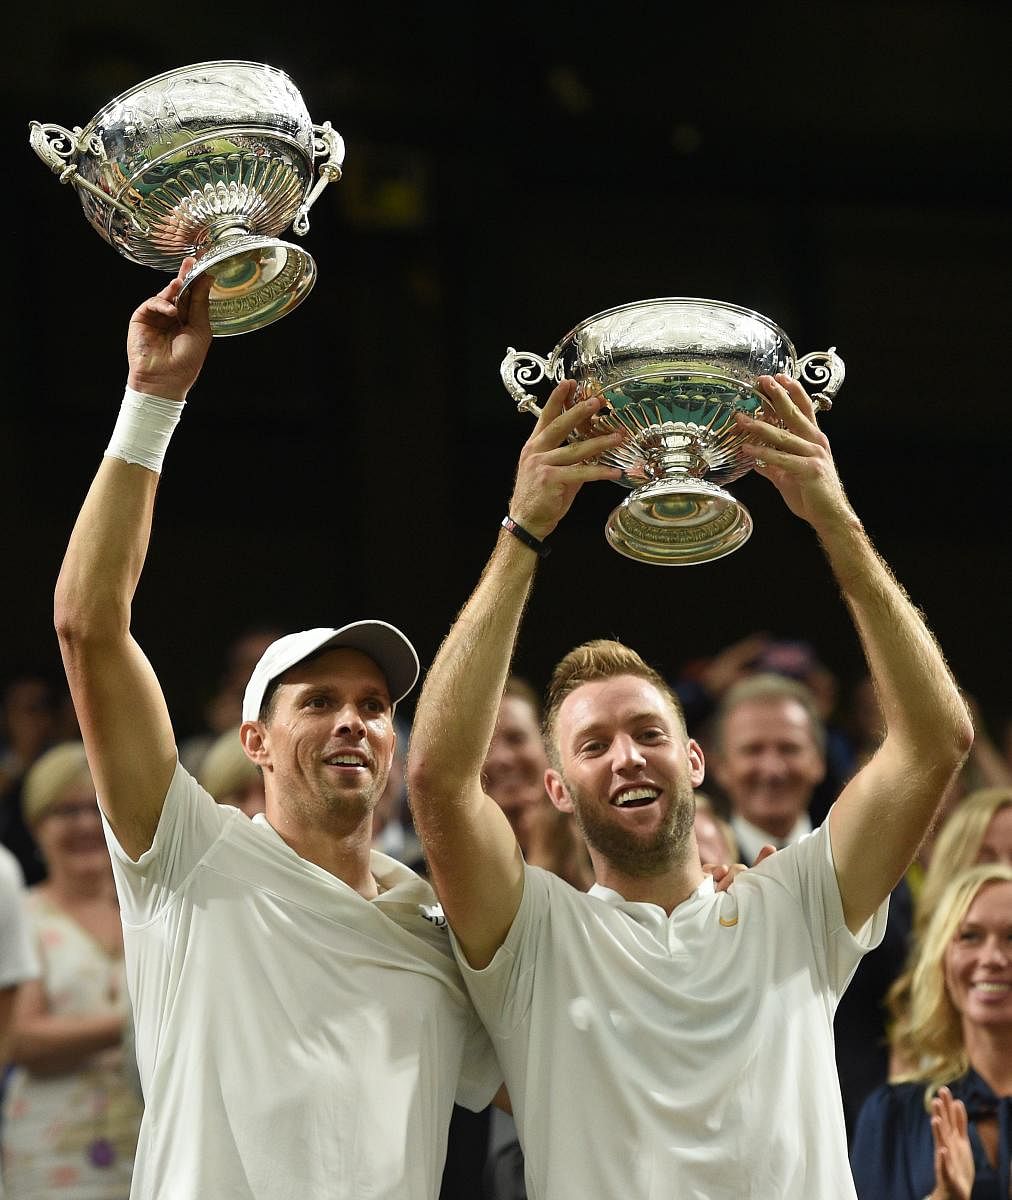 Mike Bryan reigns supreme without brother